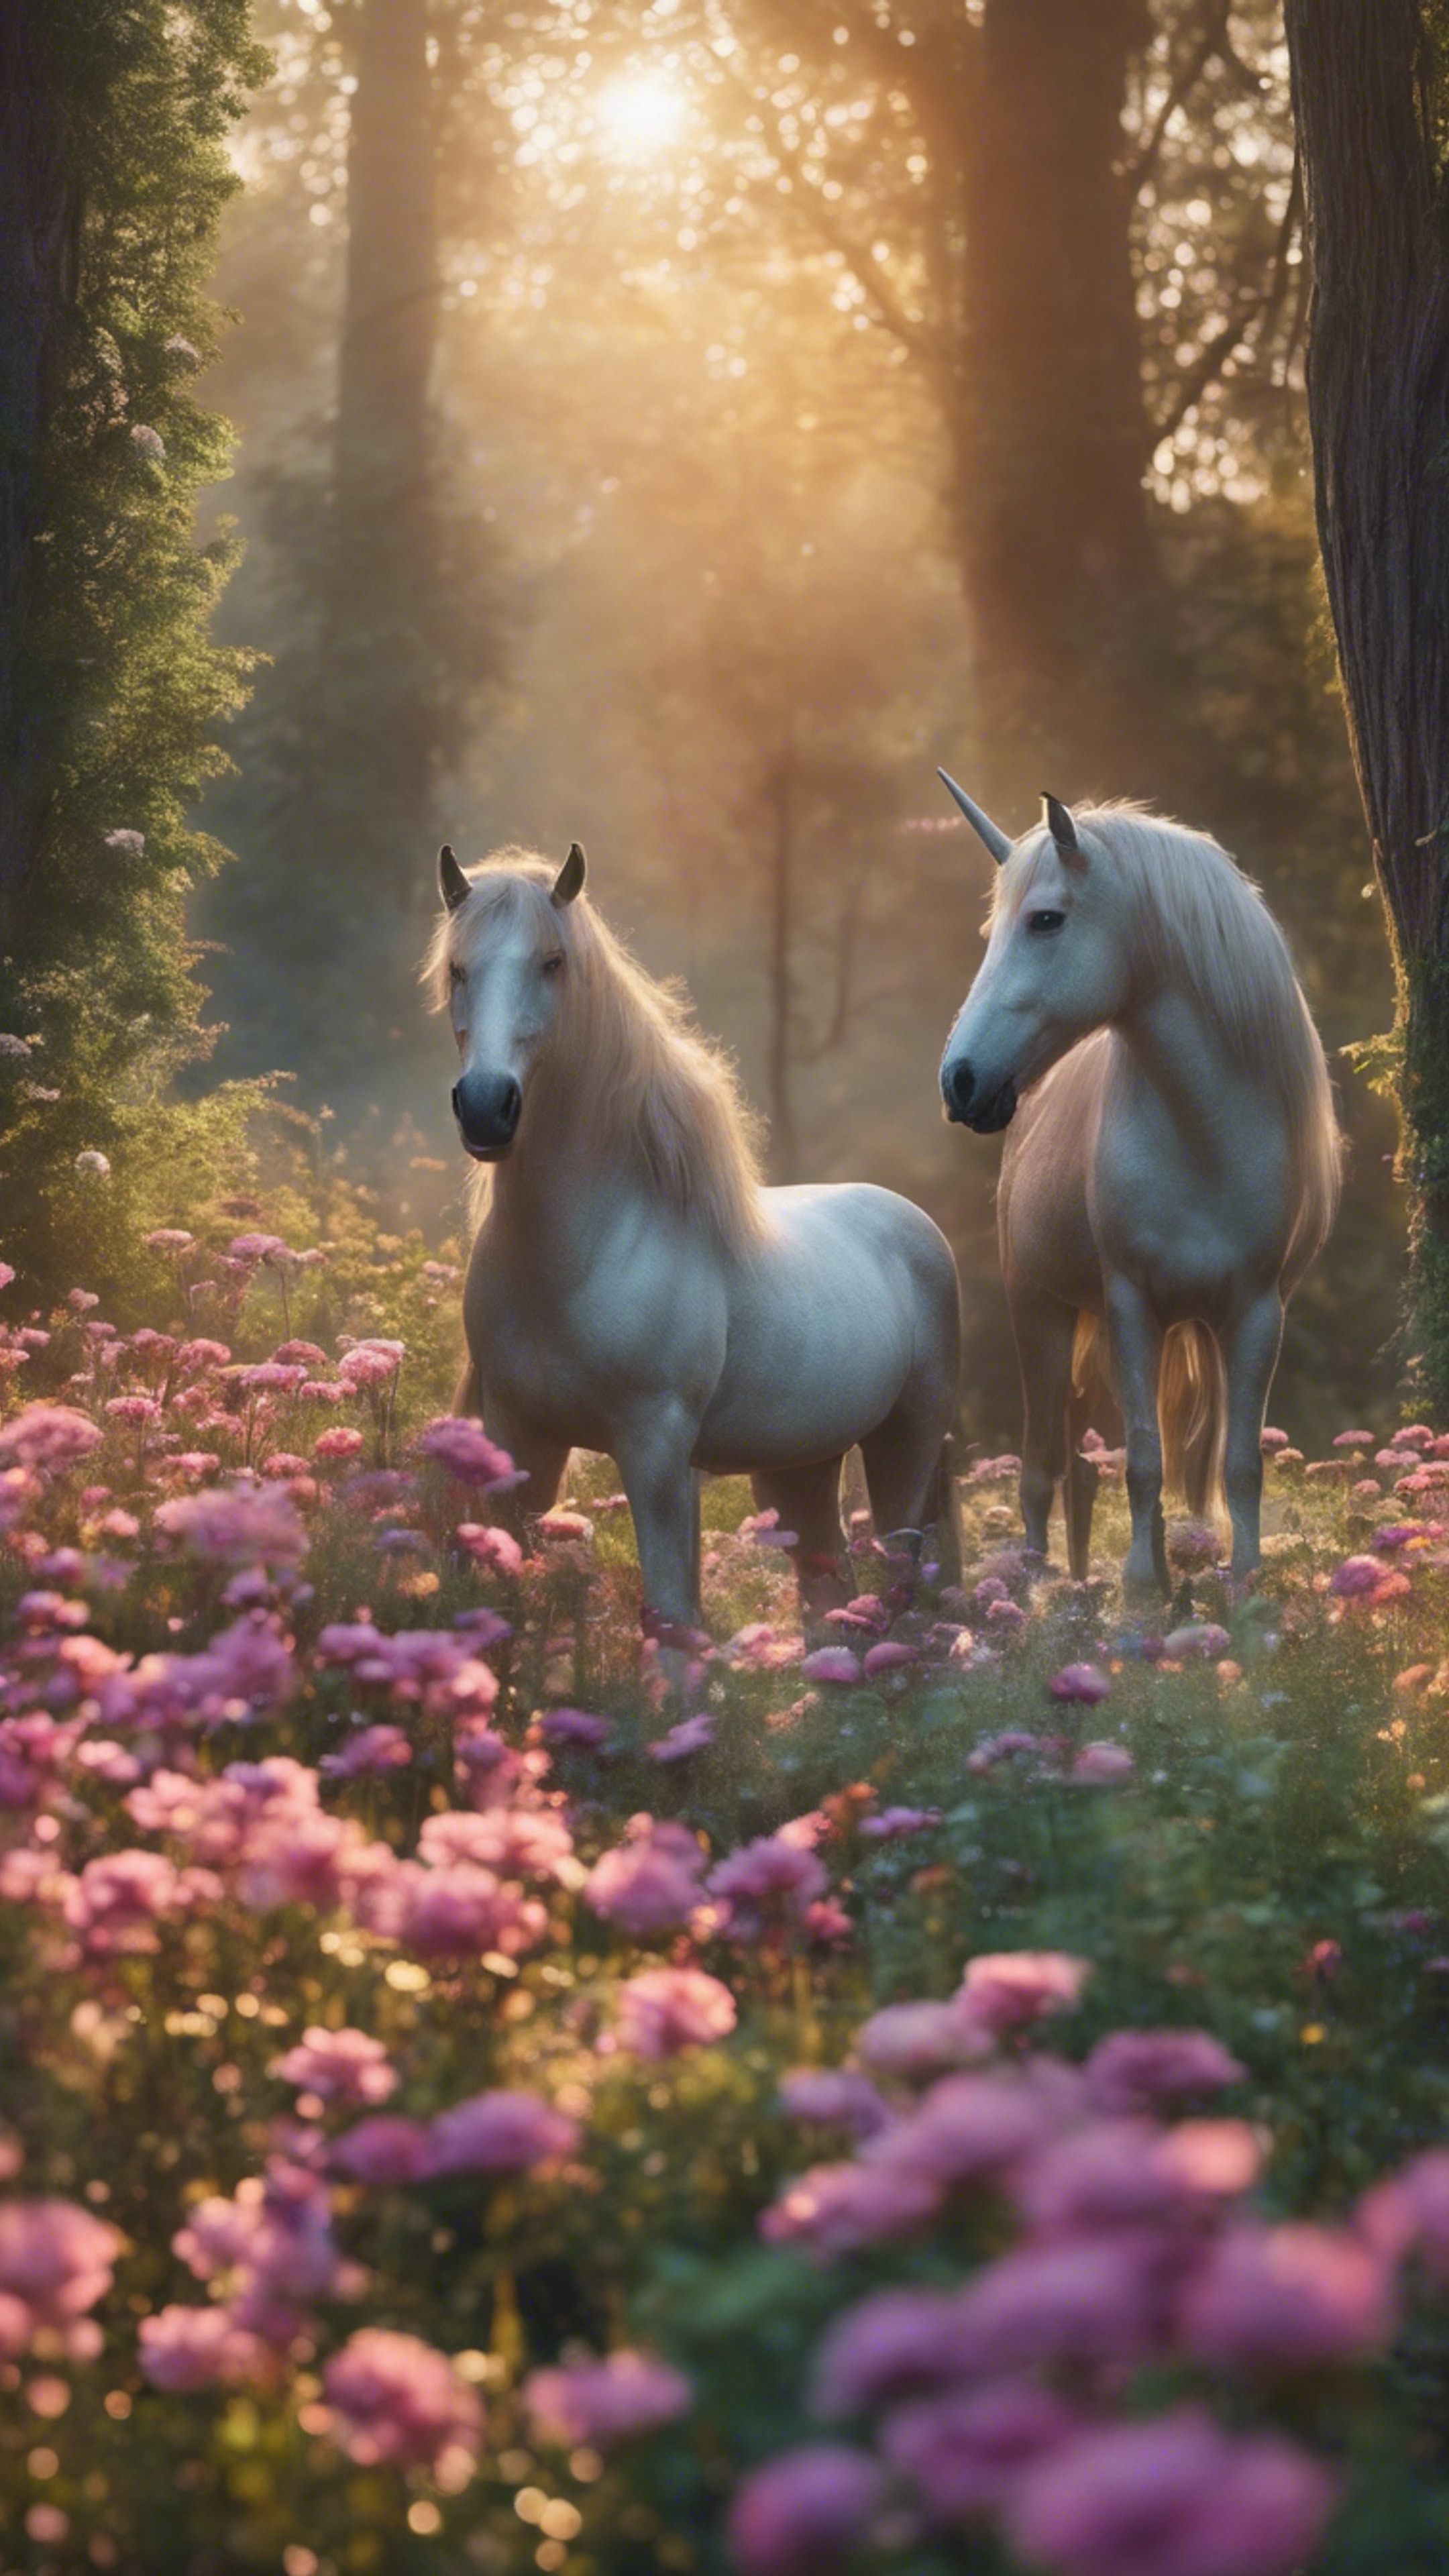 A view of an enchanted forest at sunrise, where an array of colorful flowers are in full bloom, and a family of unicorns graze peacefully.壁紙[71098c56173340d796ac]